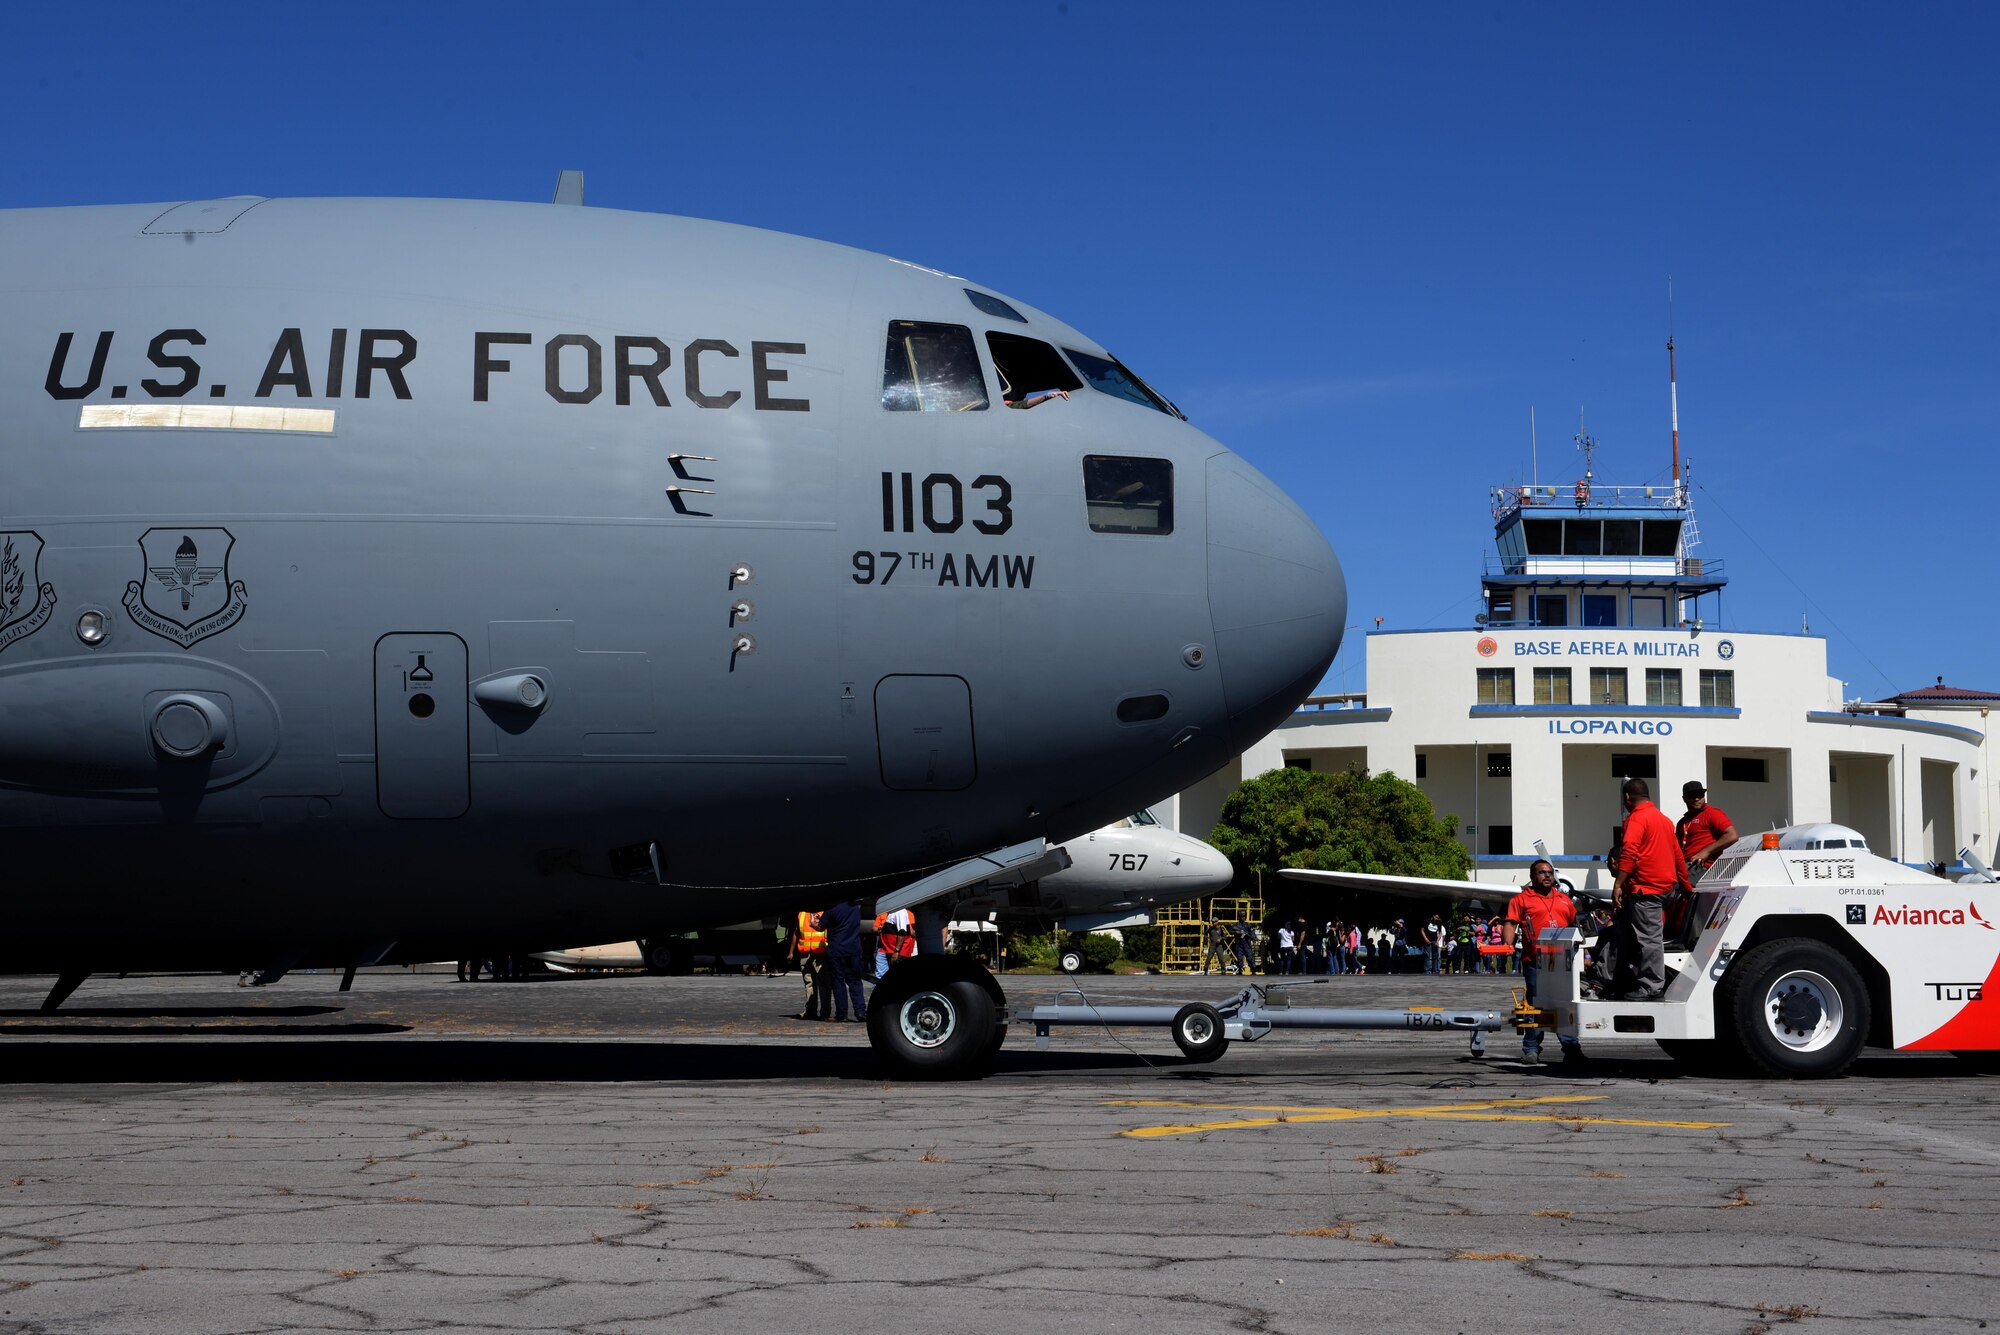 A U.S. Air Force C-17 Globemaster III cargo aircraft, 58th Airlift Squadron, sits on the flightline at Ilopango International Airport in San Salvador, El Savador, Jan. 30, during the 2016 Ilopango Airshow. The C-17 was sent from Altus Air Force Base, Okla., to foster relationships between the U.S. and El Salvador. The aircraft was setup as a static display for the attendees to view and learn about some of its capabilities. (U.S. Air Force photo by Senior Airman Franklin R. Ramos/Released)